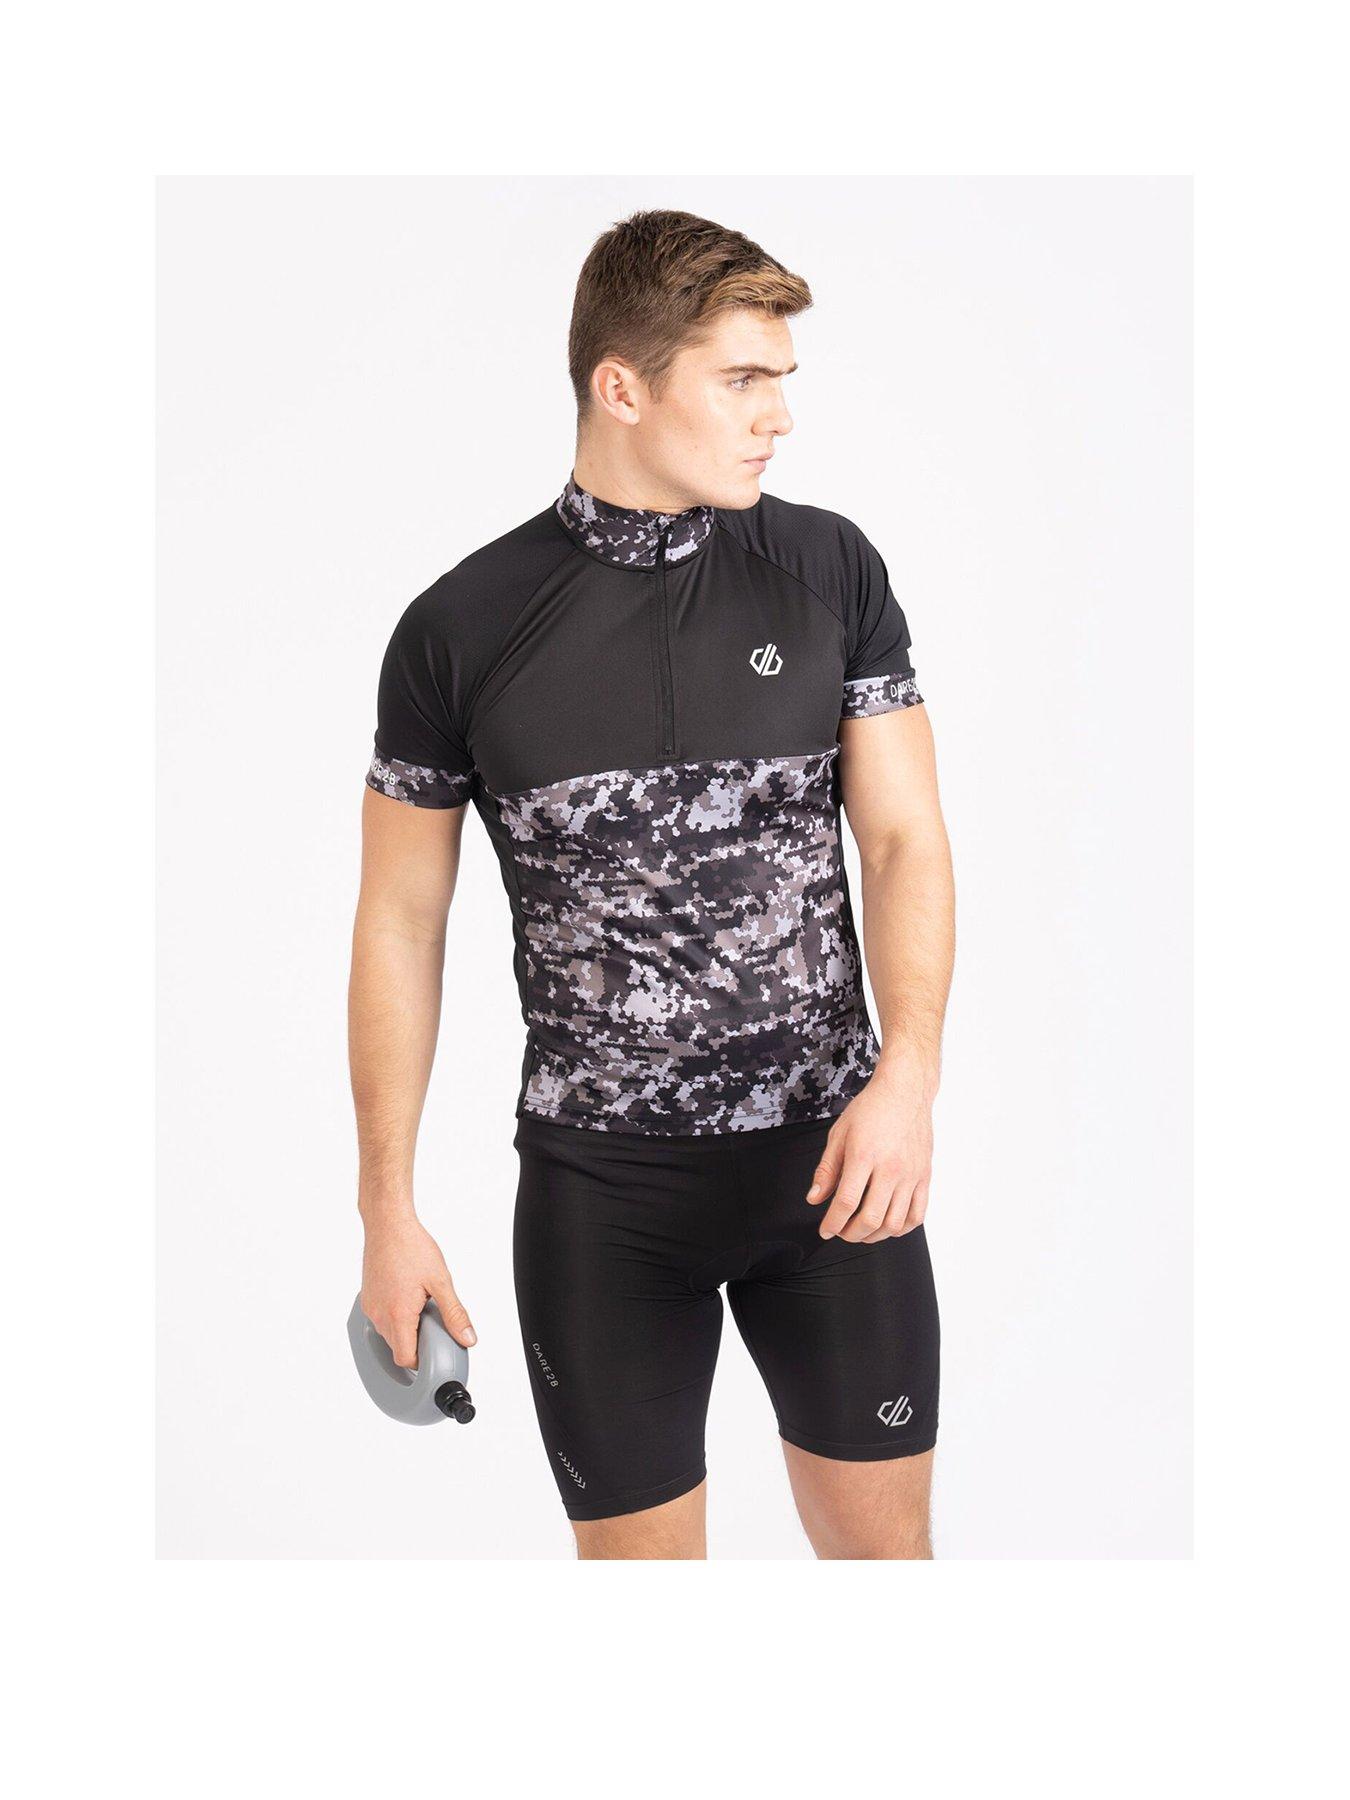  STAY THE COURSE BLACK MENS JERSEY